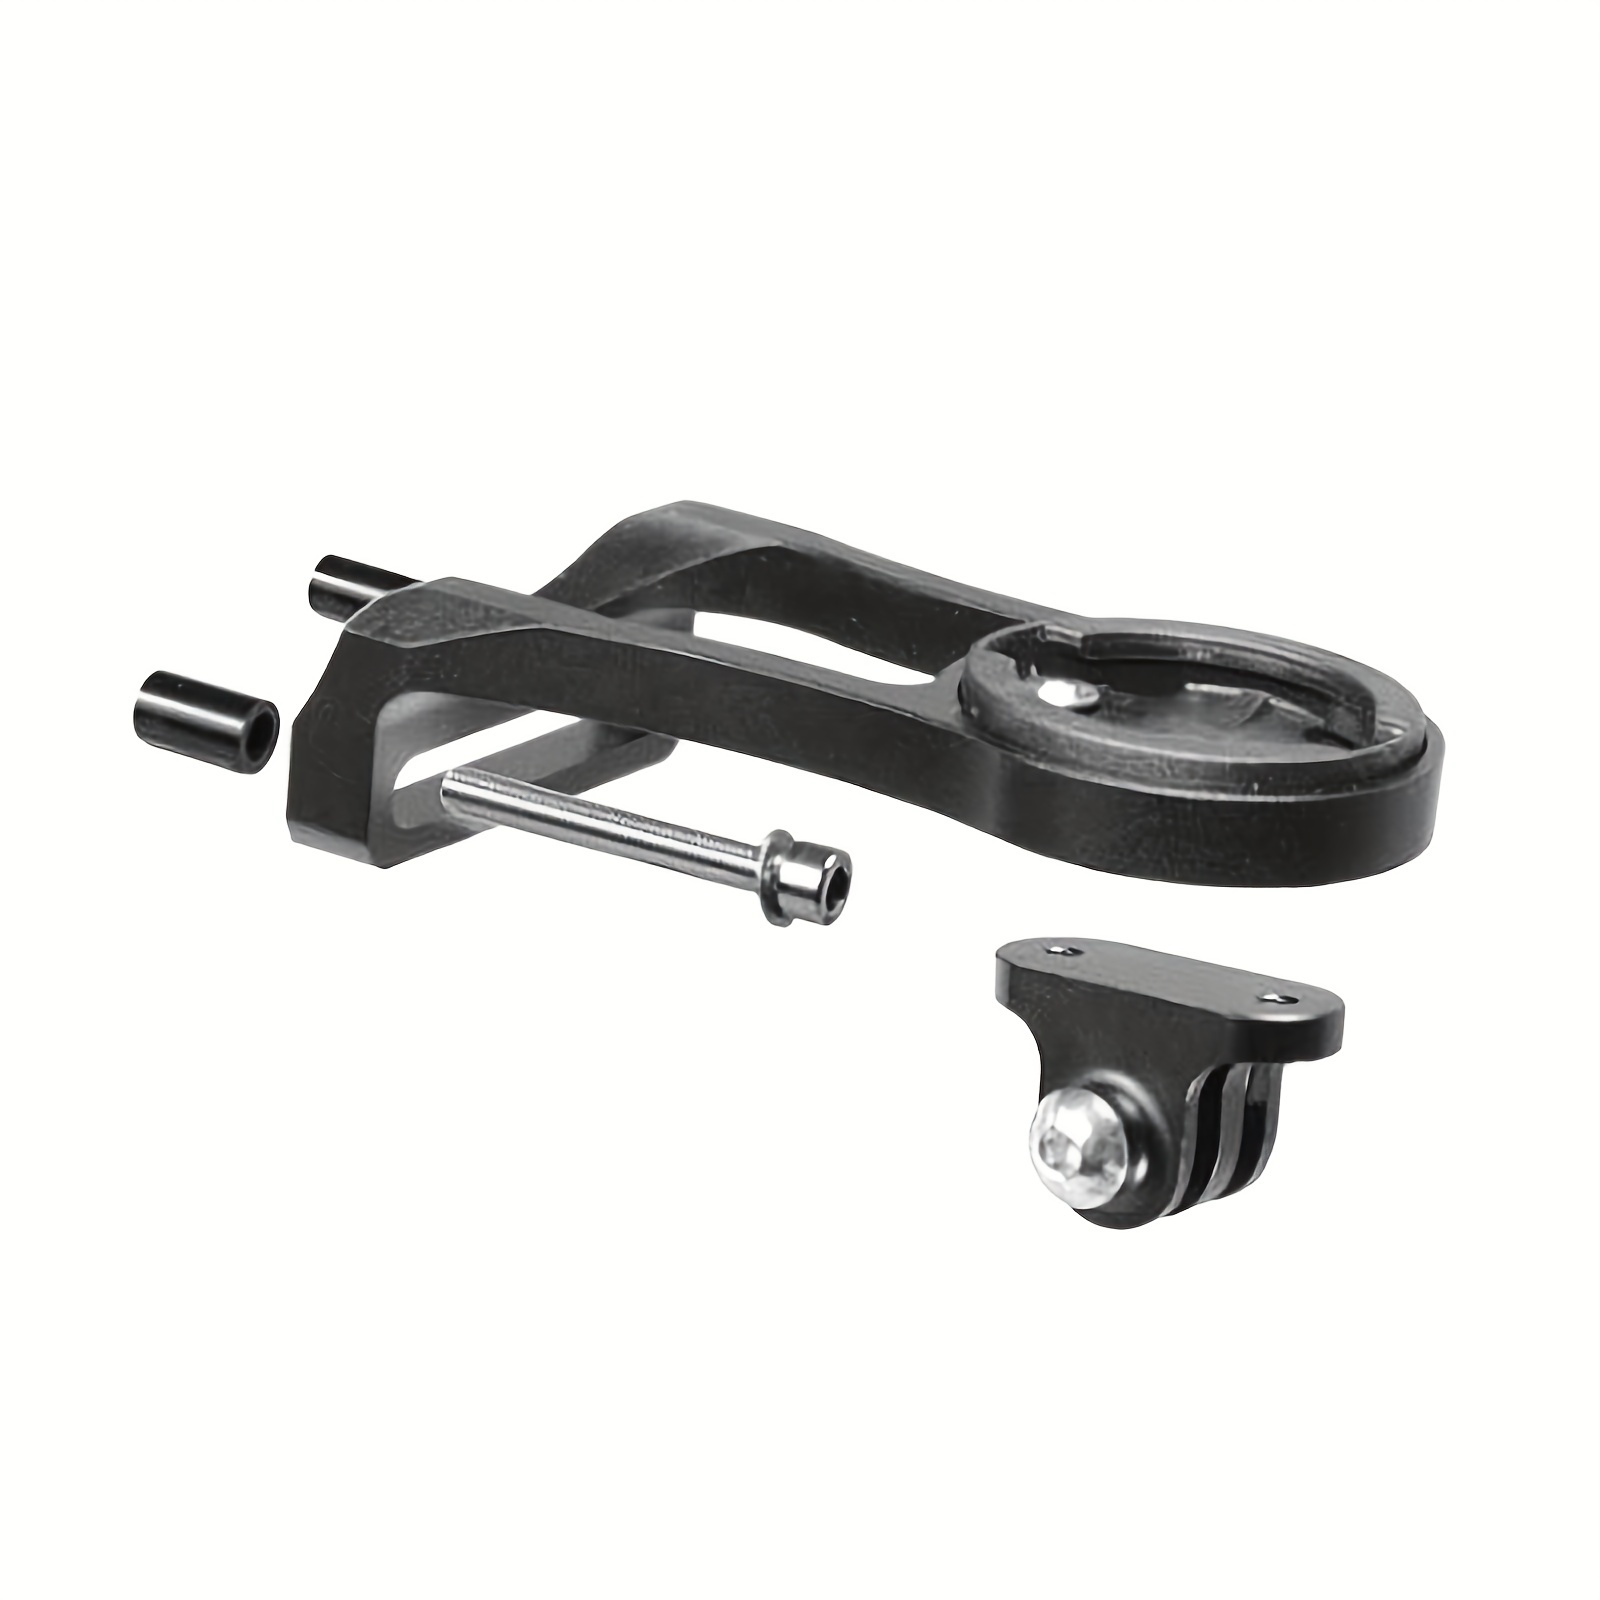 Garmin Edge Extended Out-front Mount